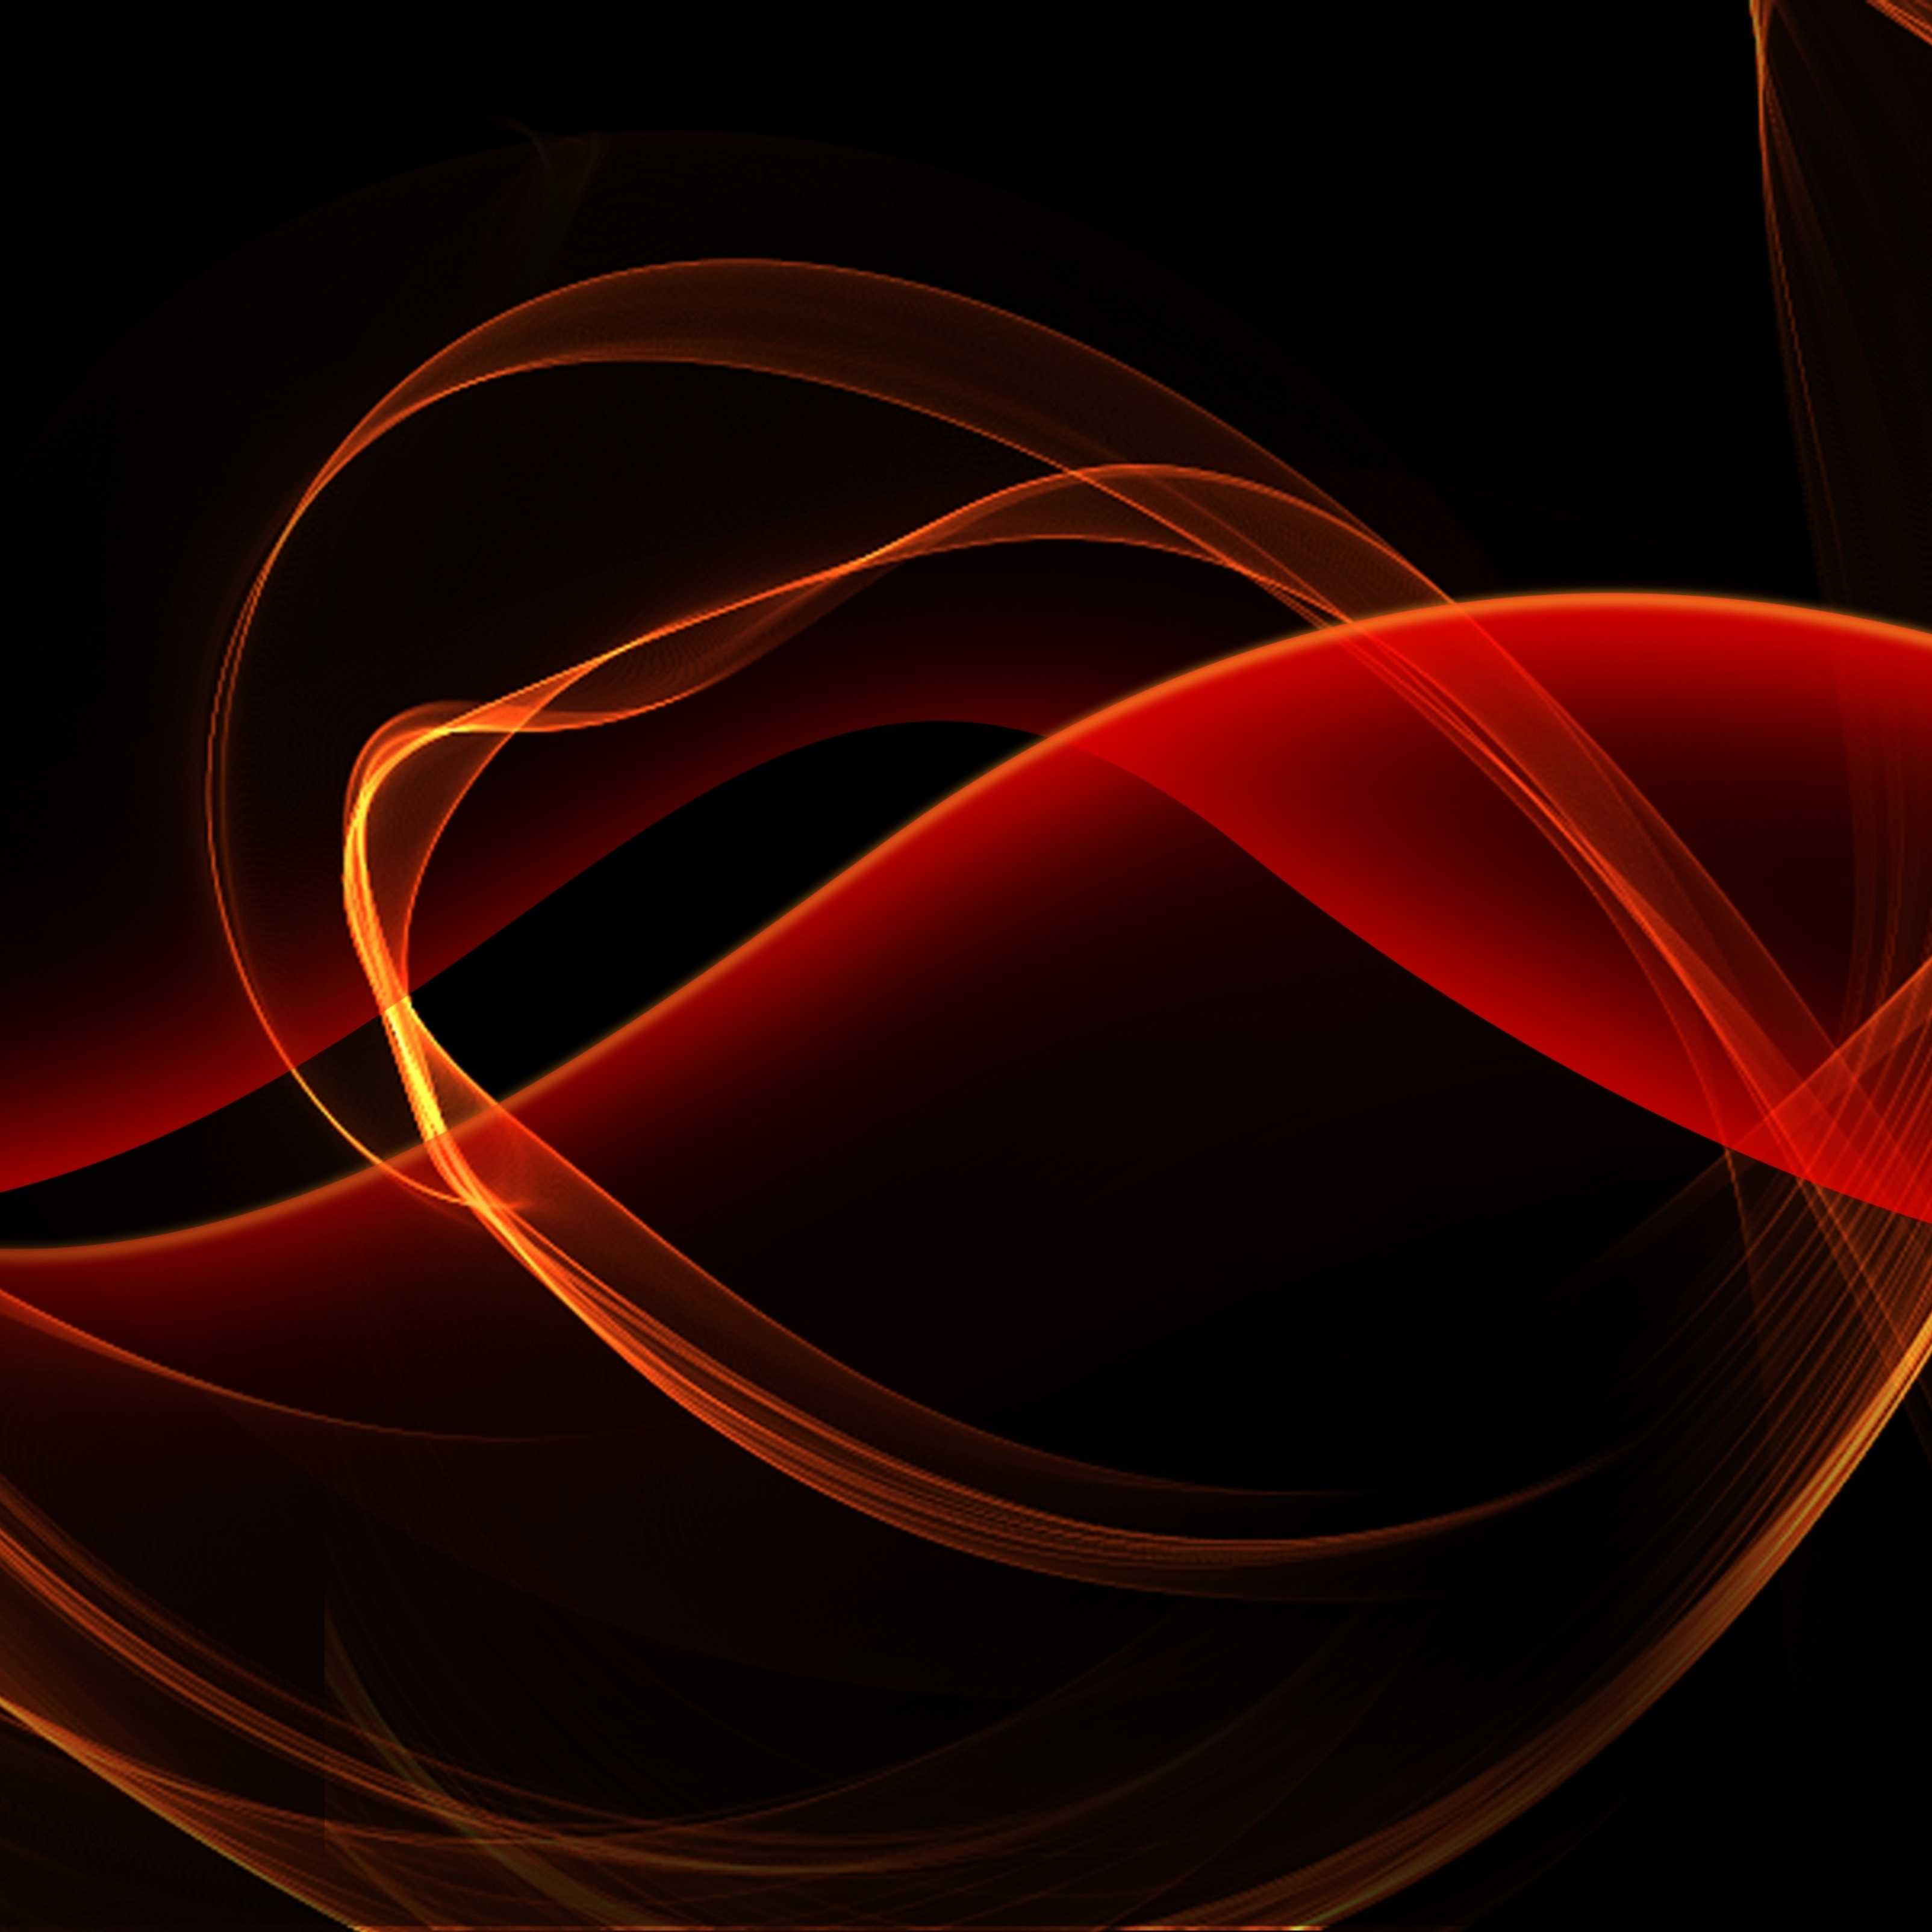 Black and Red Glowing Curves iPad Wallpaper